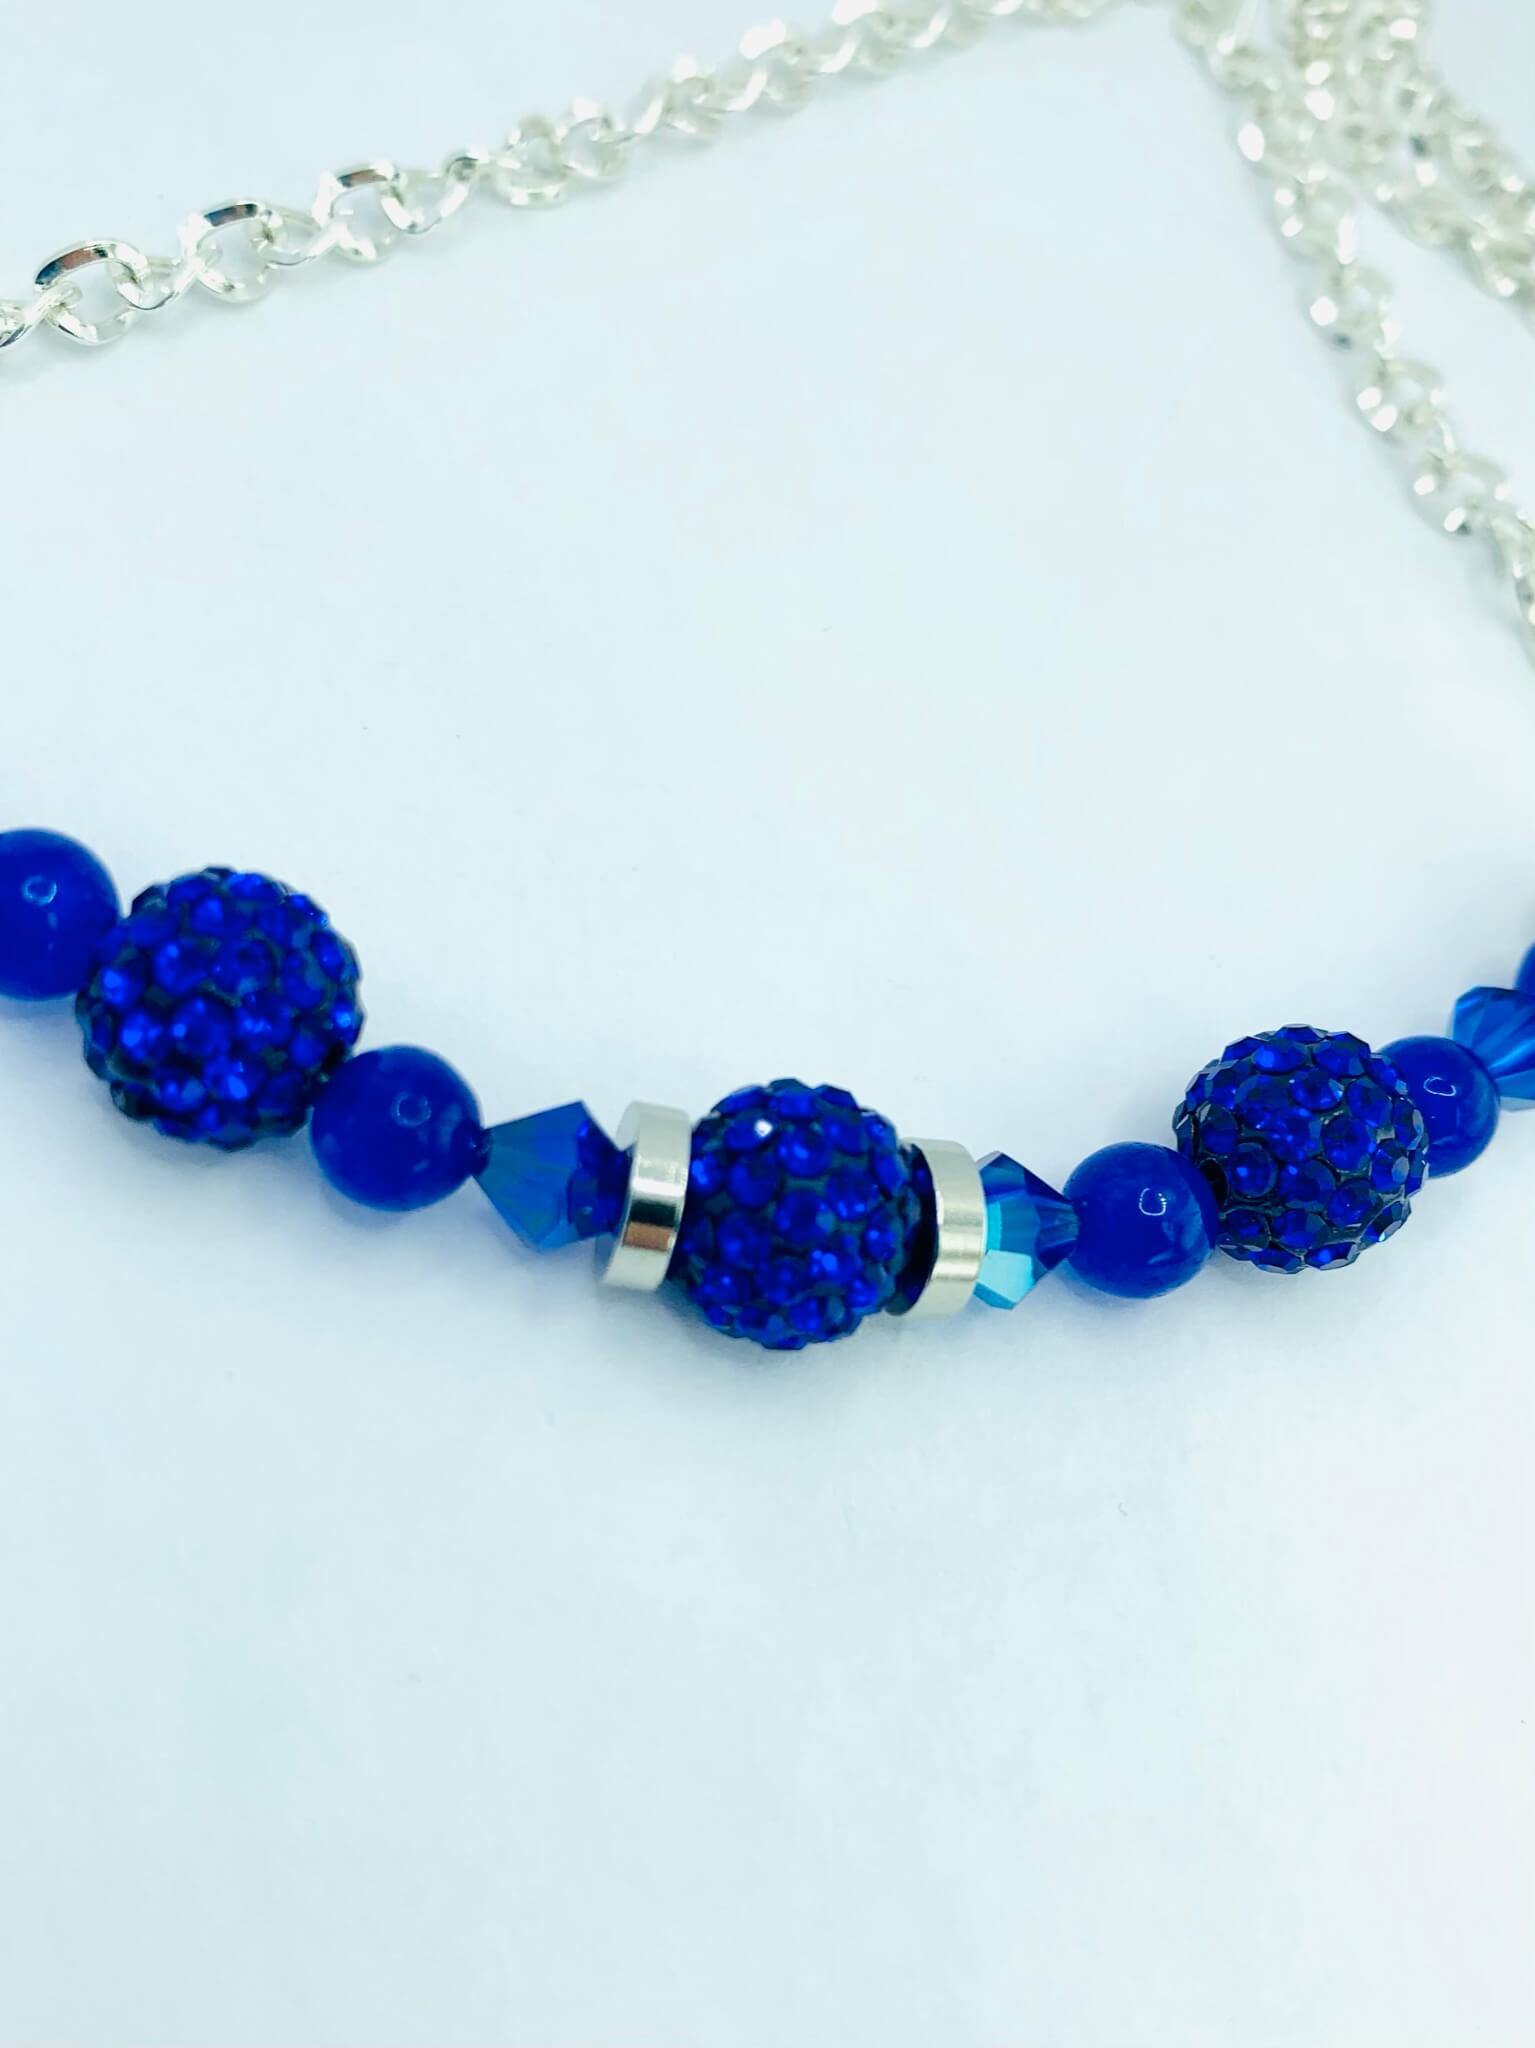 Blue Glamour Necklaces Gaia's Designs crystal, glam, glass, necklace, rhinestone, stainless